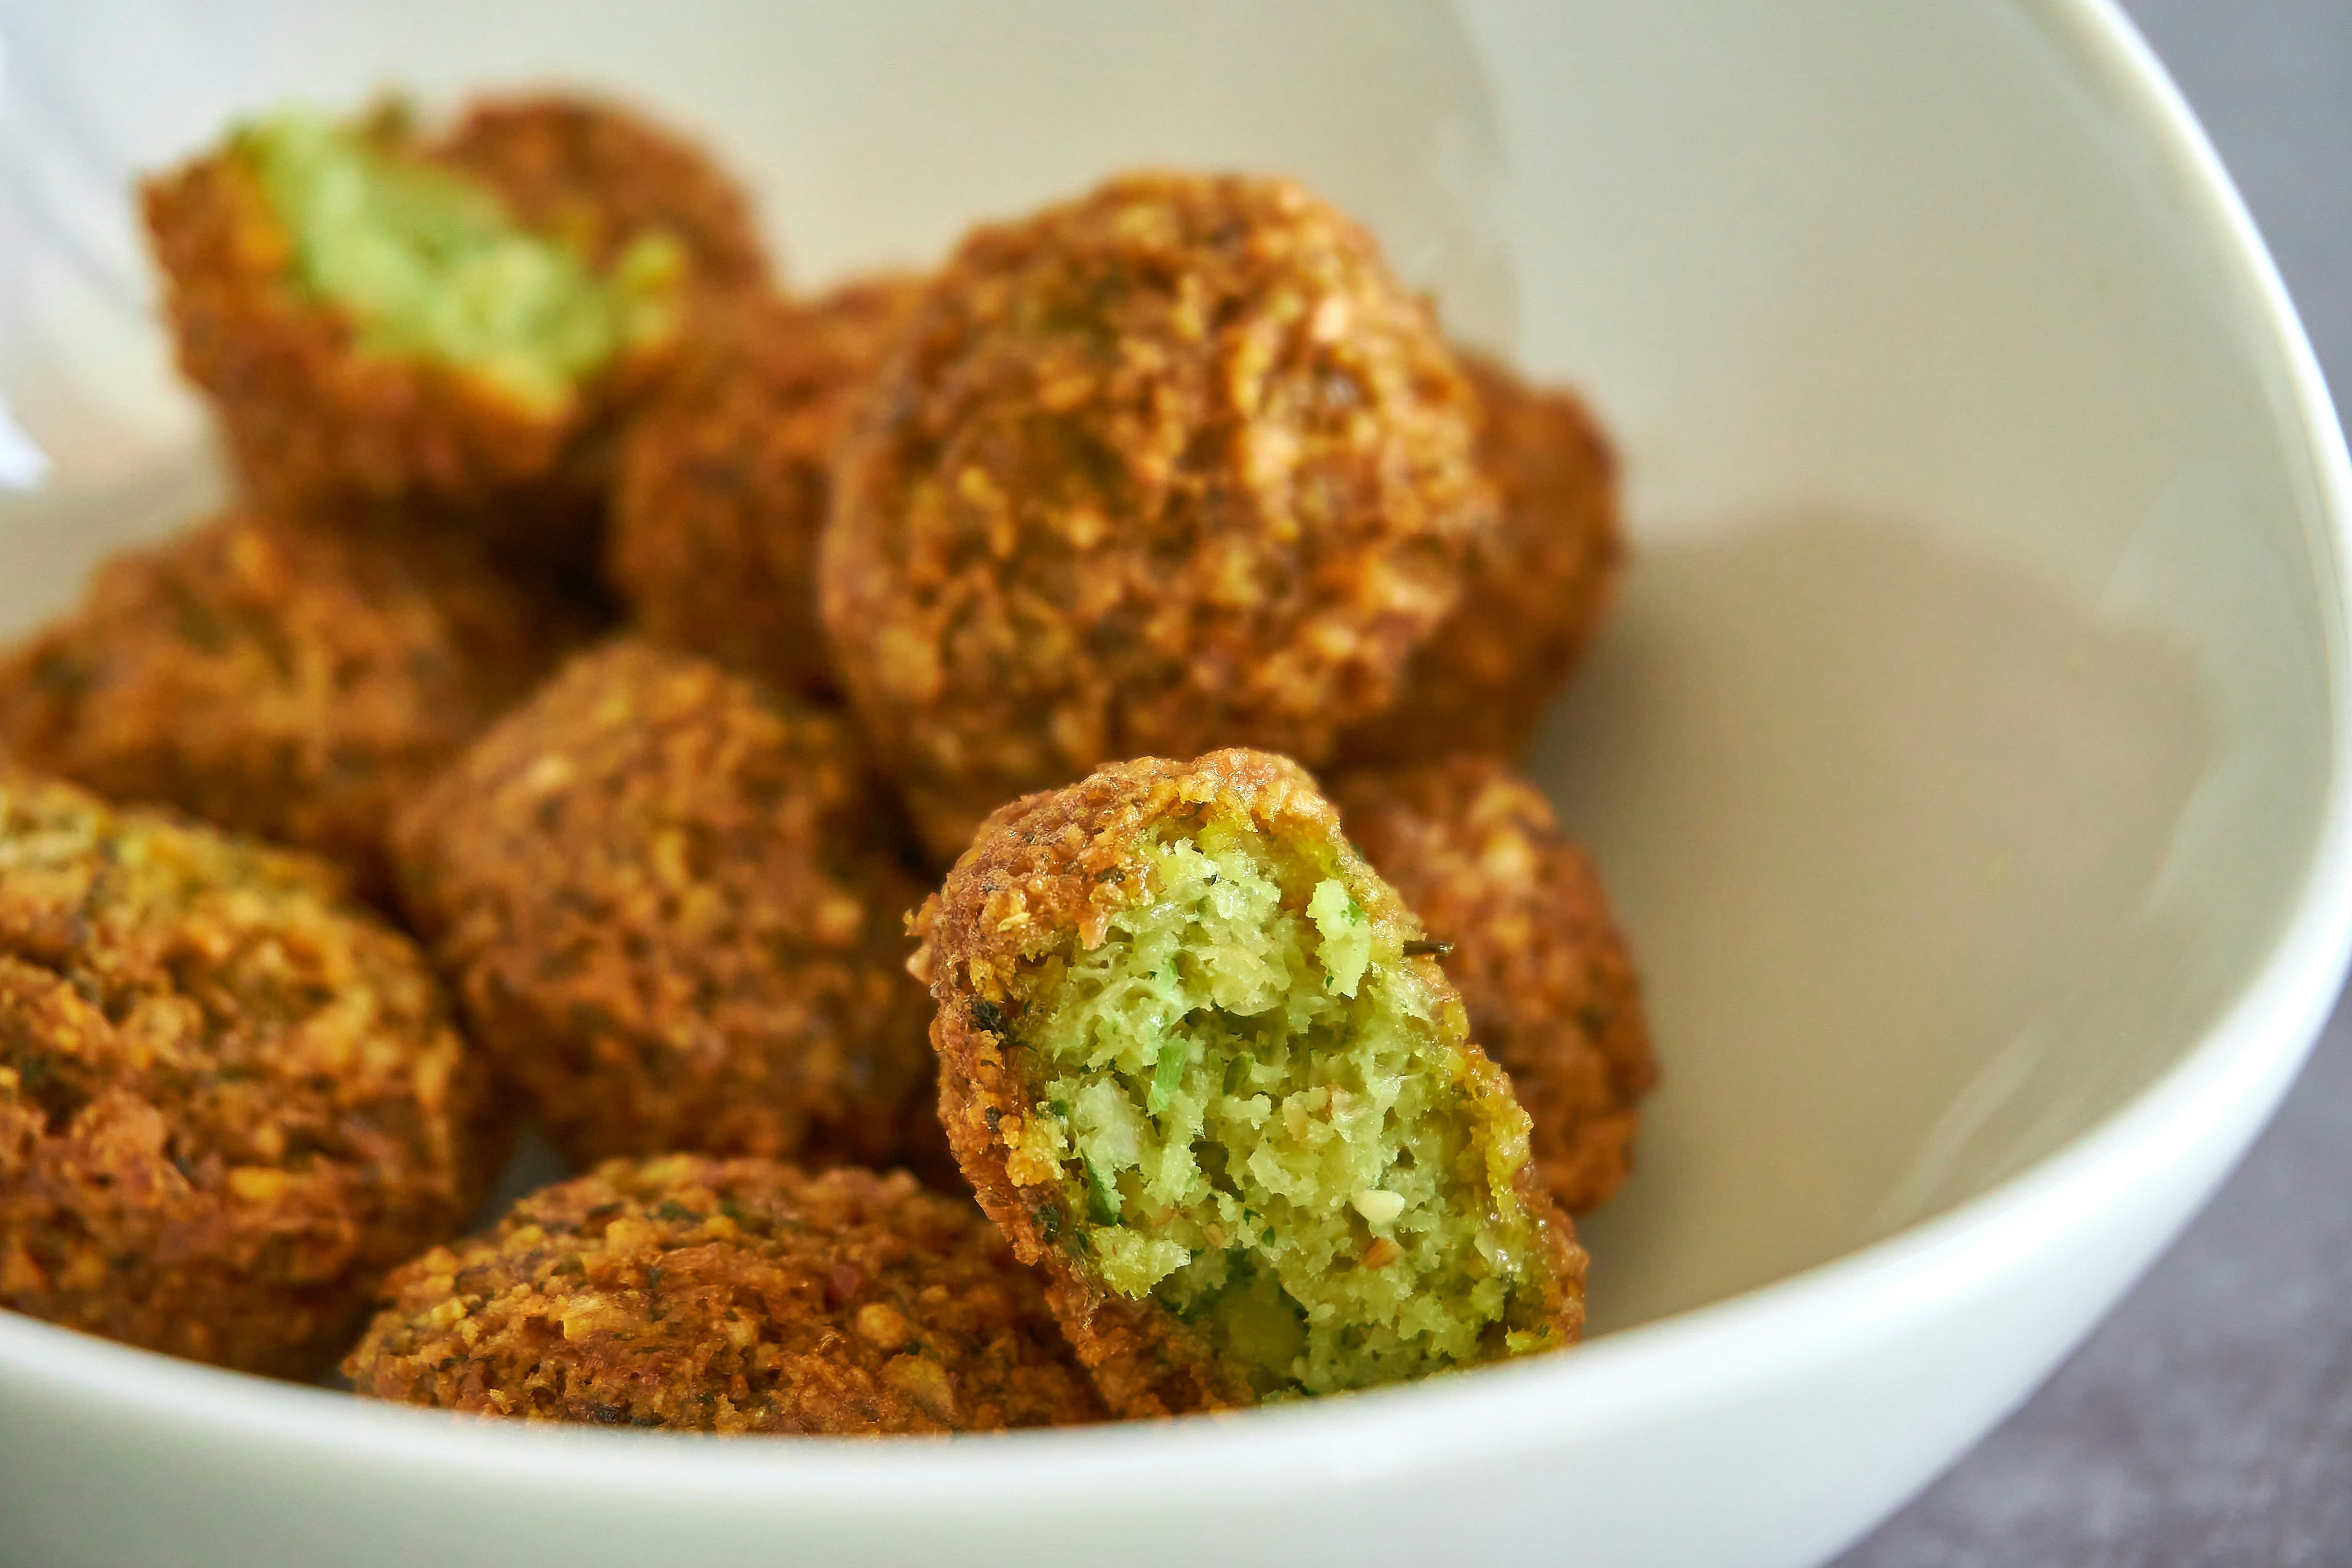 A bowl of falafels with one falafel revealing its green centre in a white bowl.